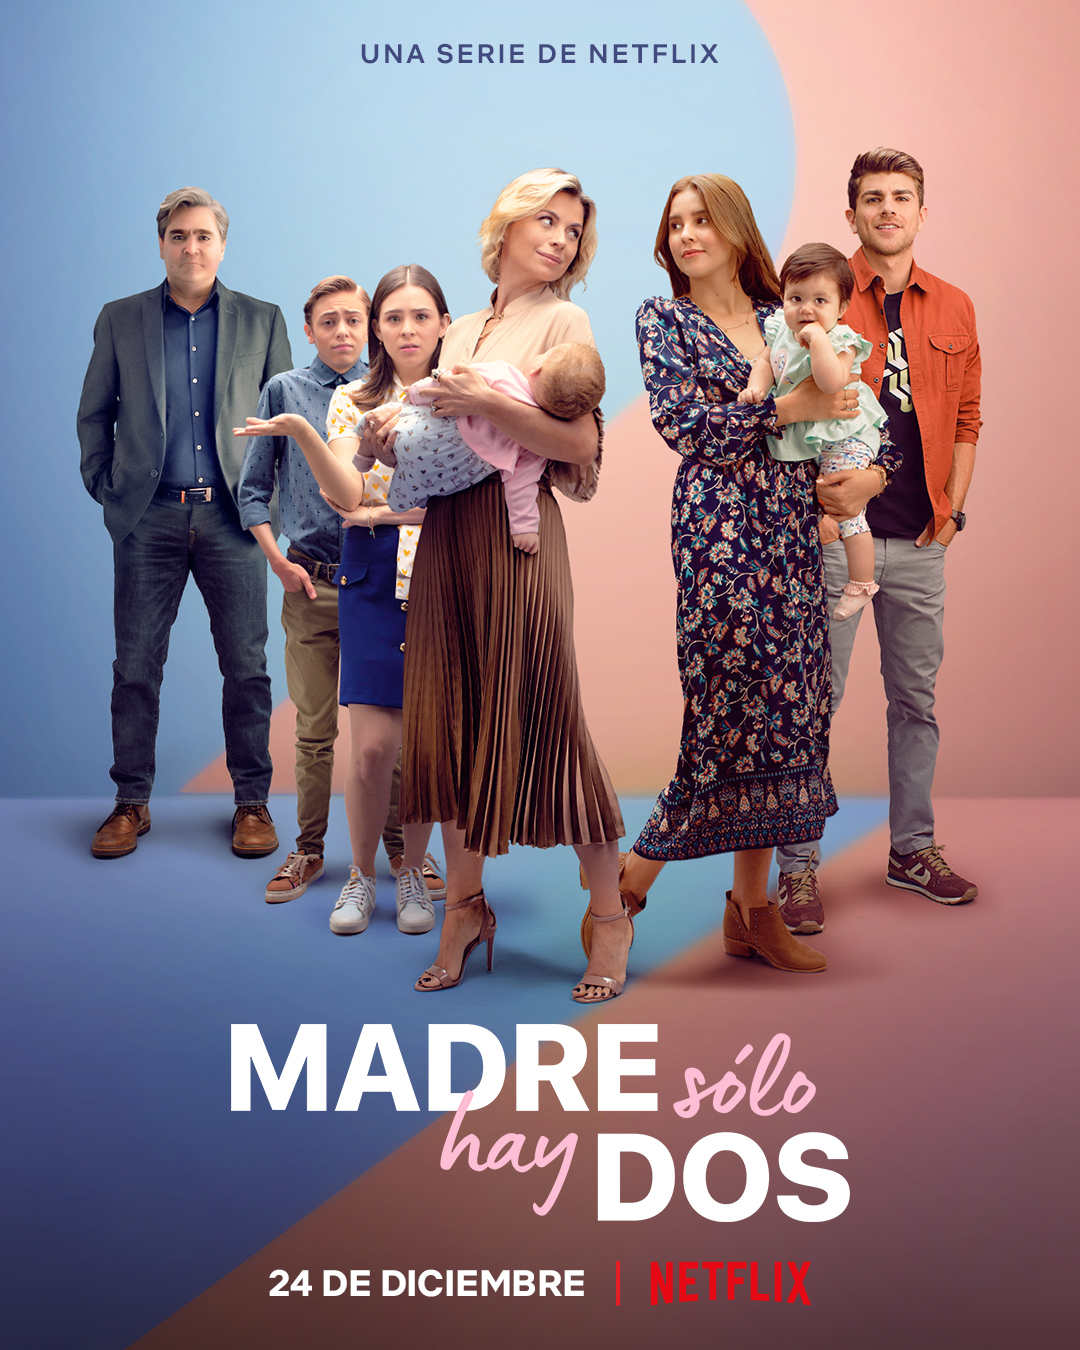 Daughter From Another Mother Season 2 (2021) ลูกคนละแม่ 